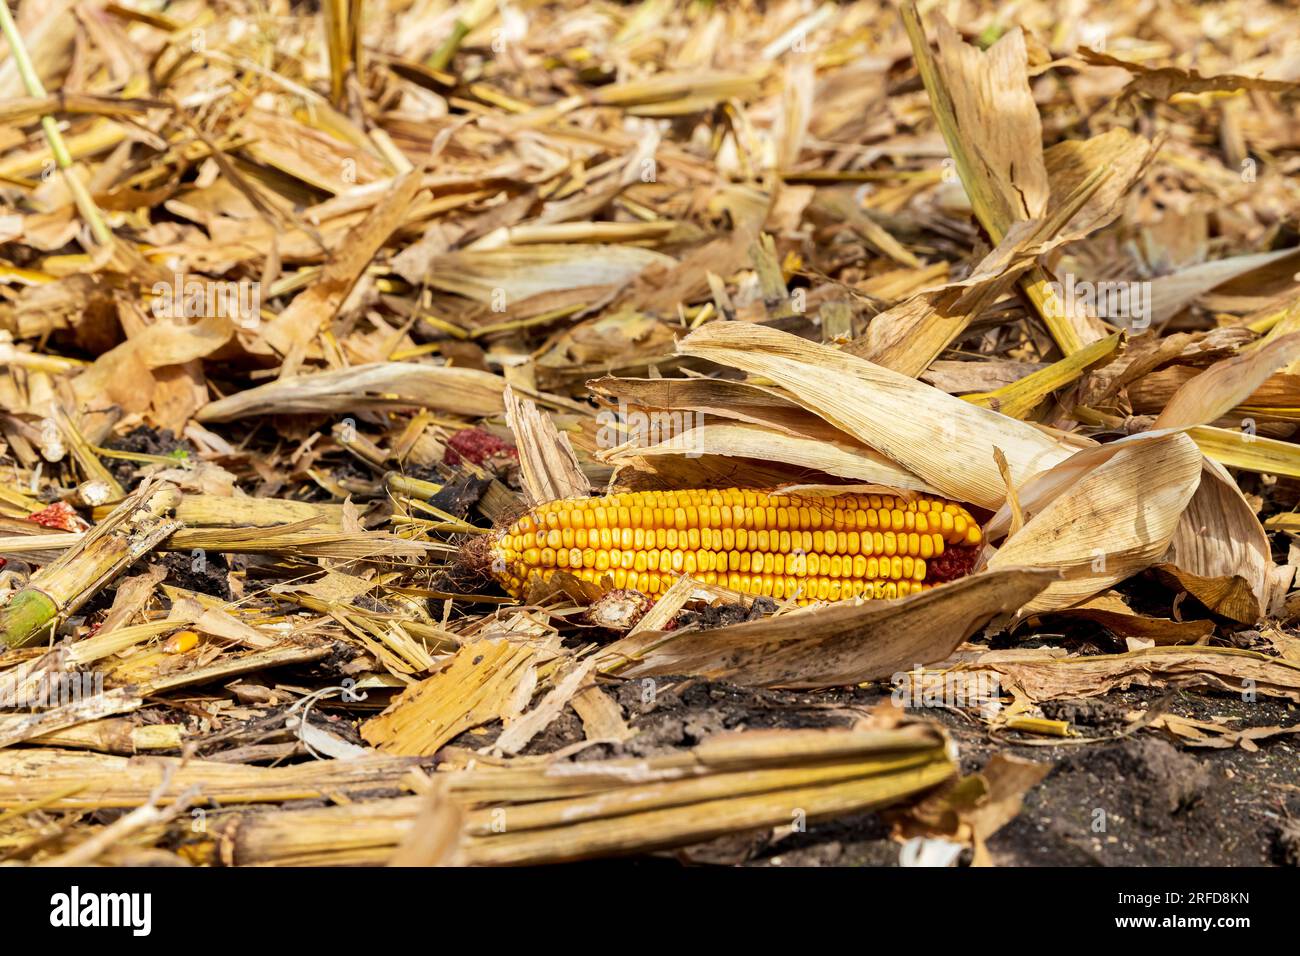 Corn stover in cornfield after harvest. Biomass energy, ethanol and renewable energy concept. Stock Photo